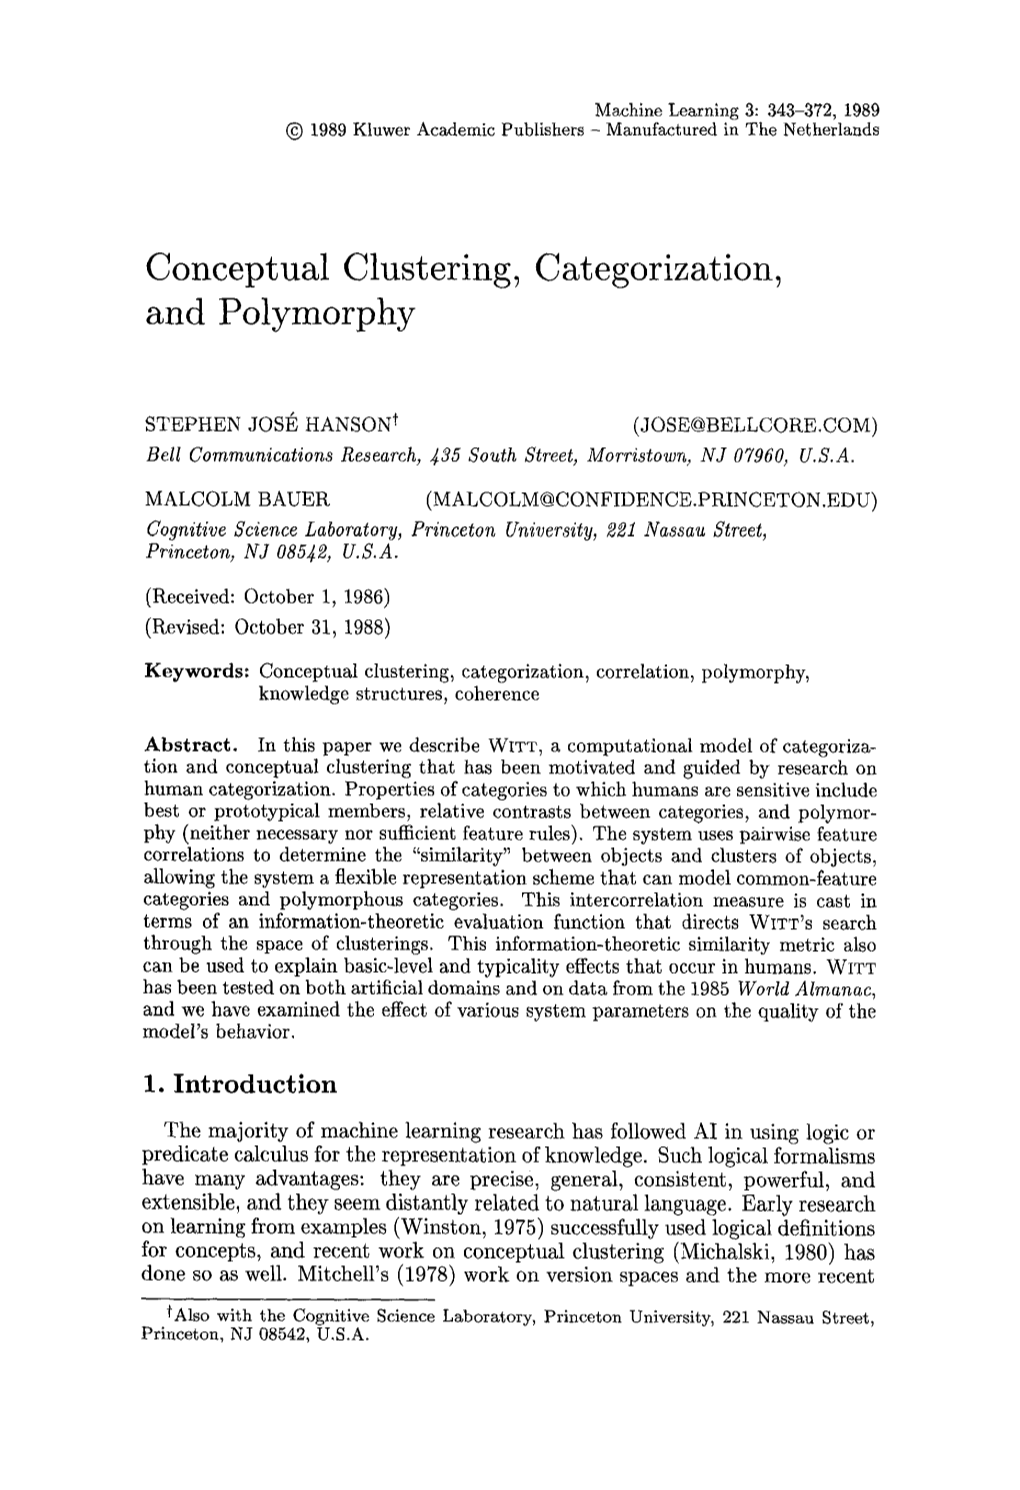 Conceptual Clustering, Categorization, and Polymorphy